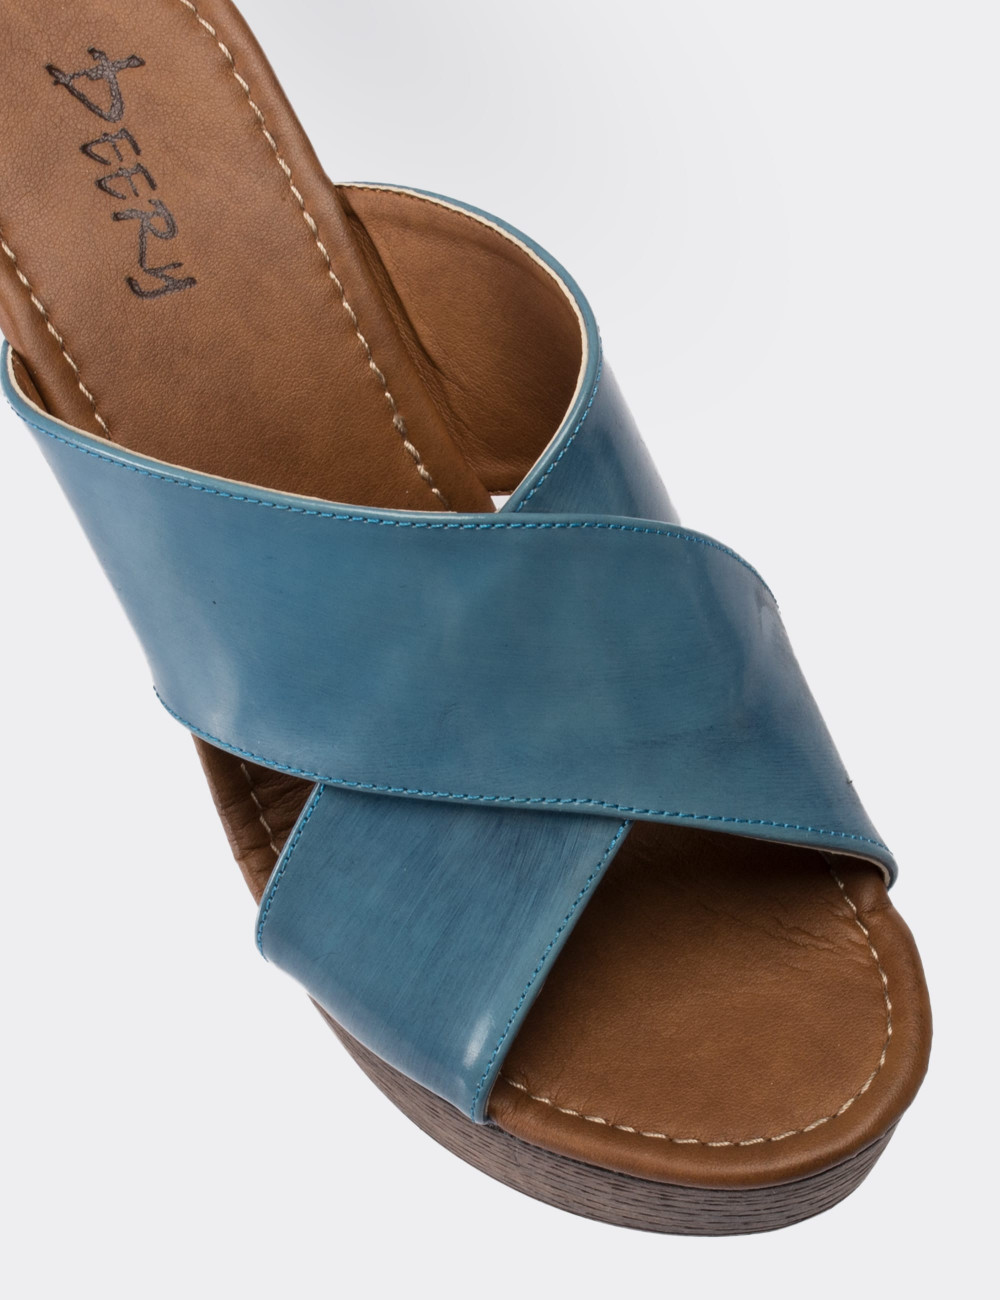 Blue  Leather Wedge Sandals - 02050ZMVIC01